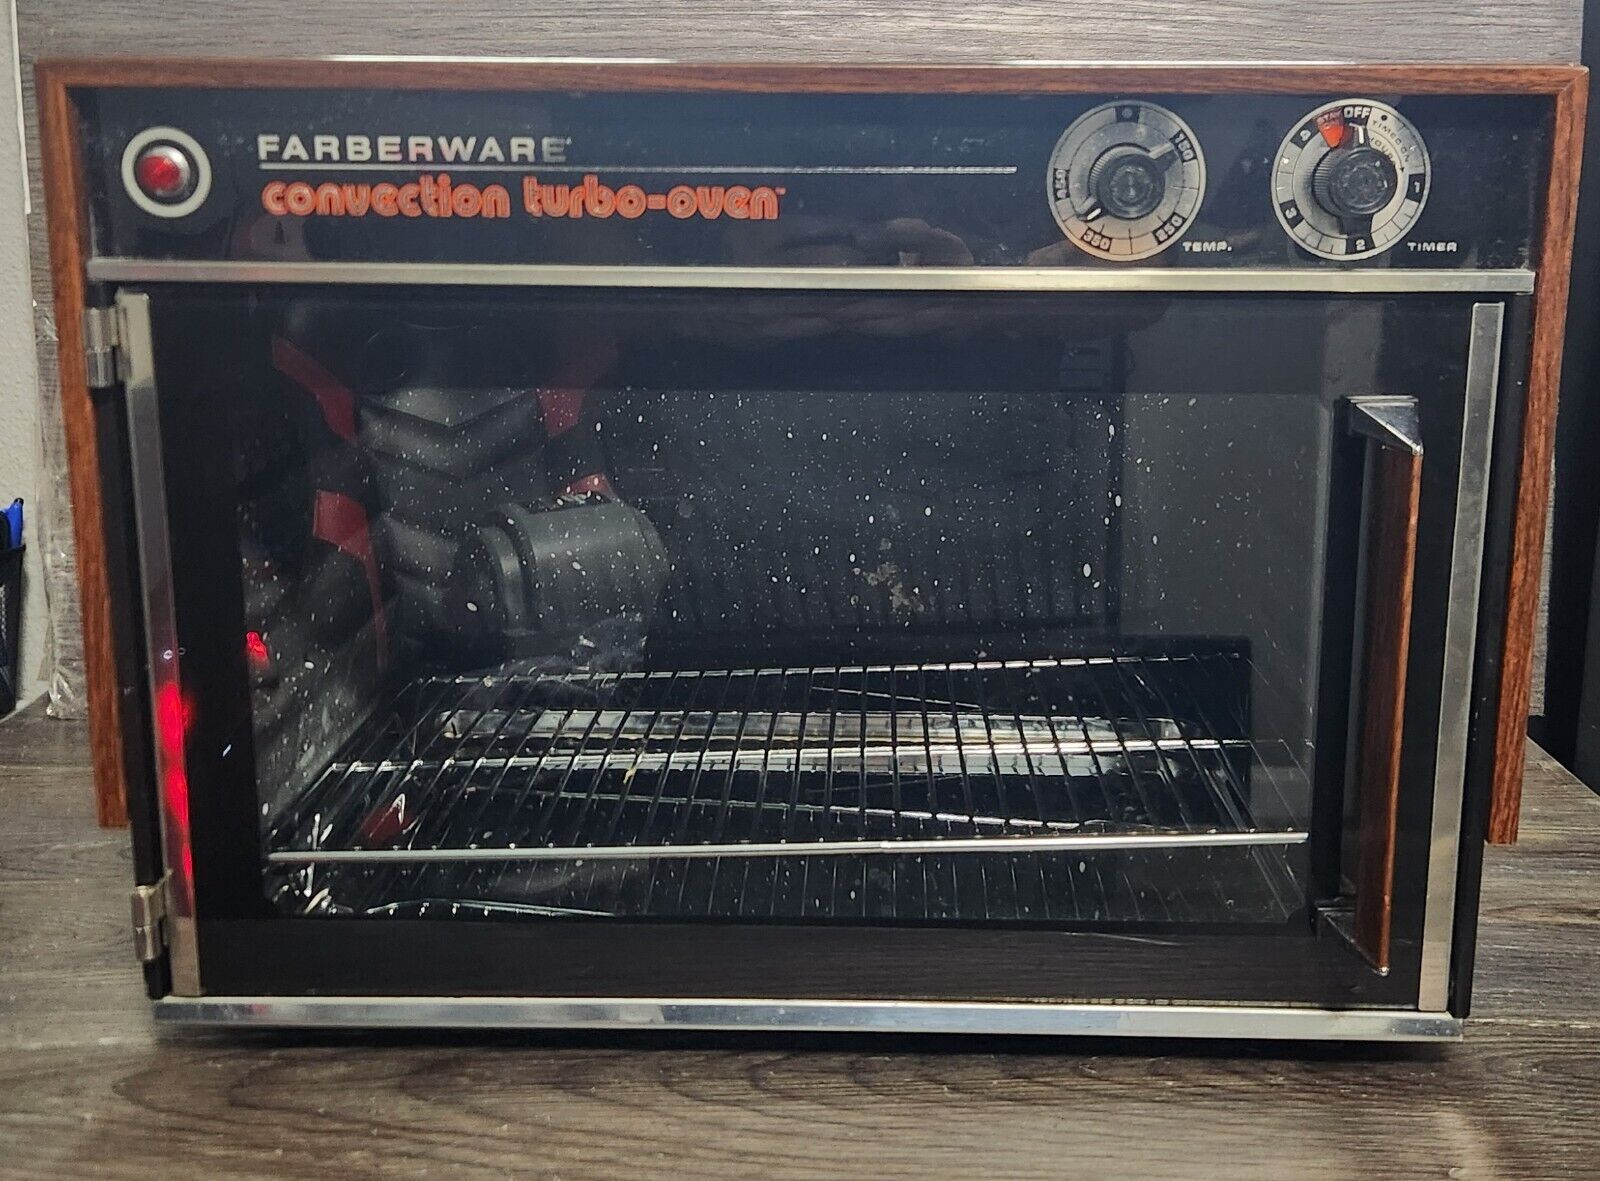 Vintage Farberware Convection Turbo Oven Model 460 Woodgrain Tested Working